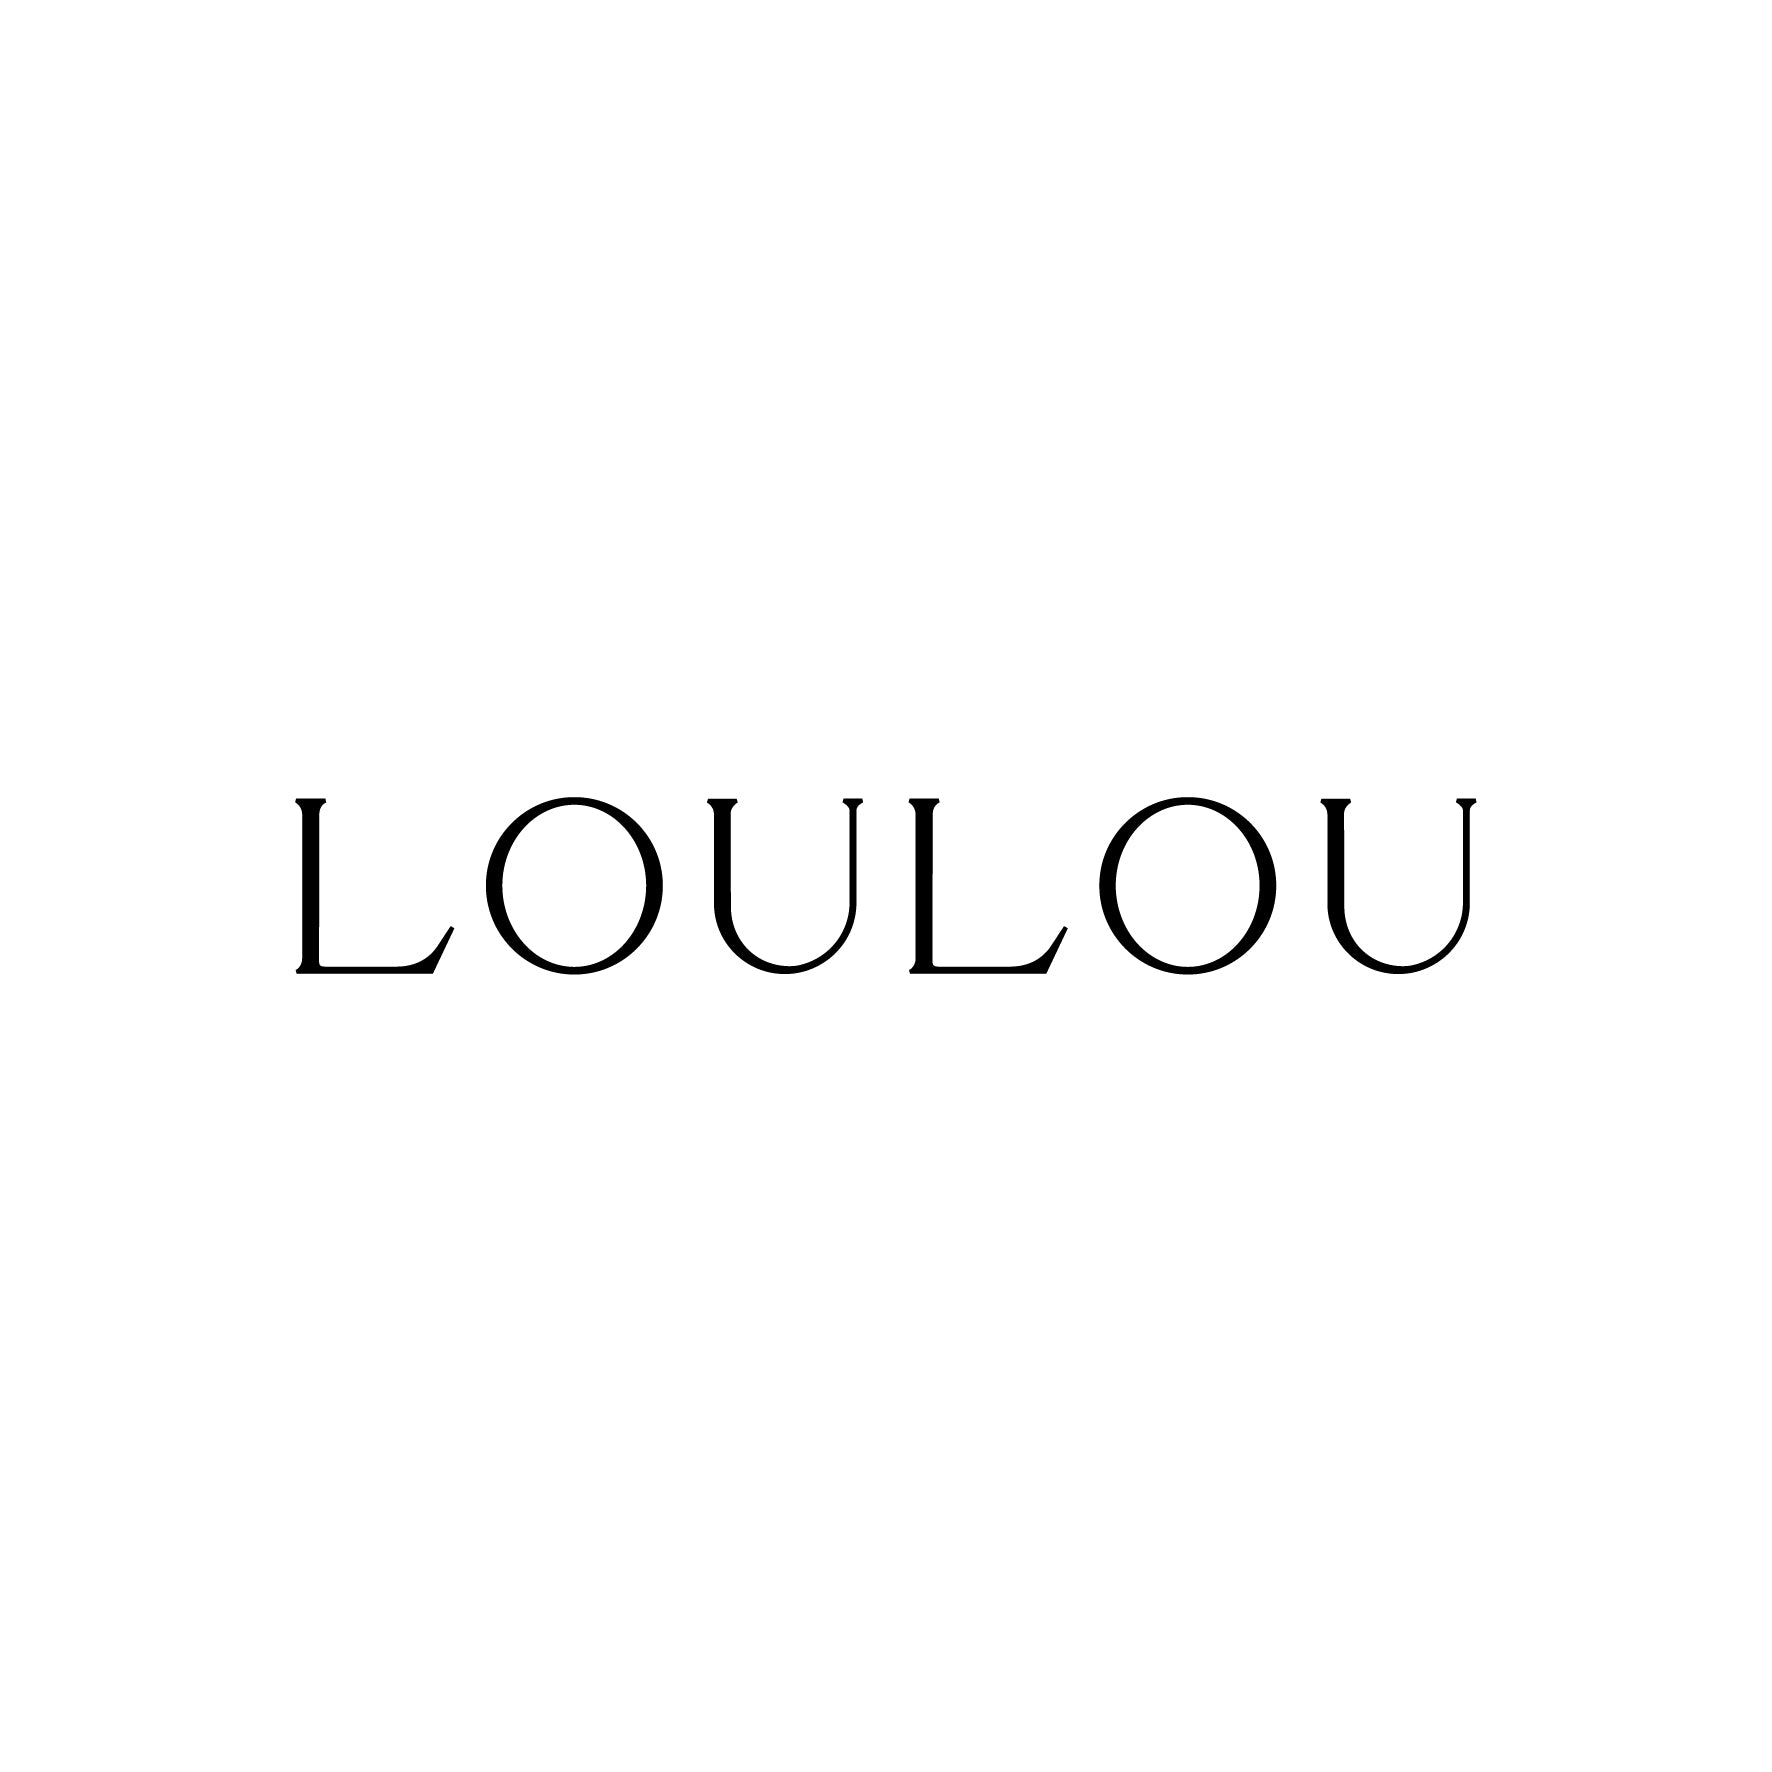 LOULOU’s Official Website